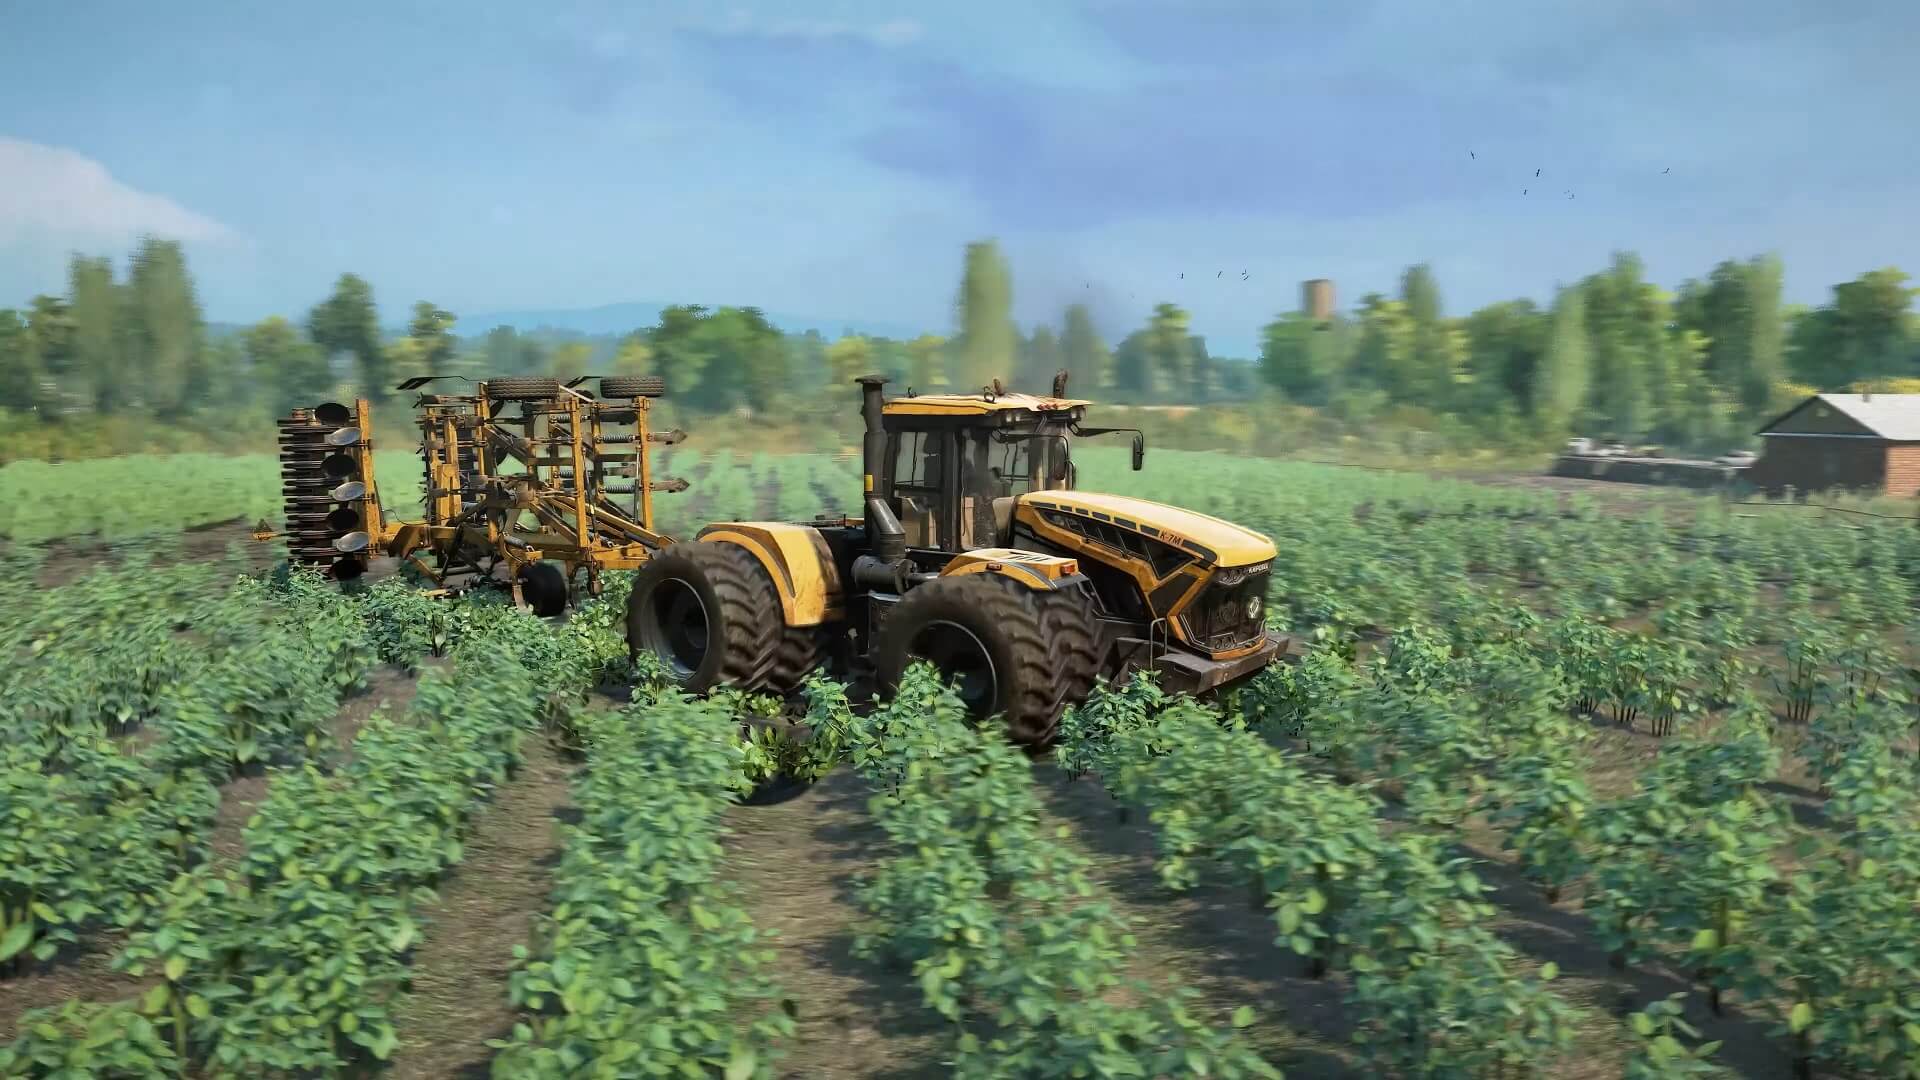 SnowRunner Season 8 screenshot showing off the farming life with a tractor and lots of produce.